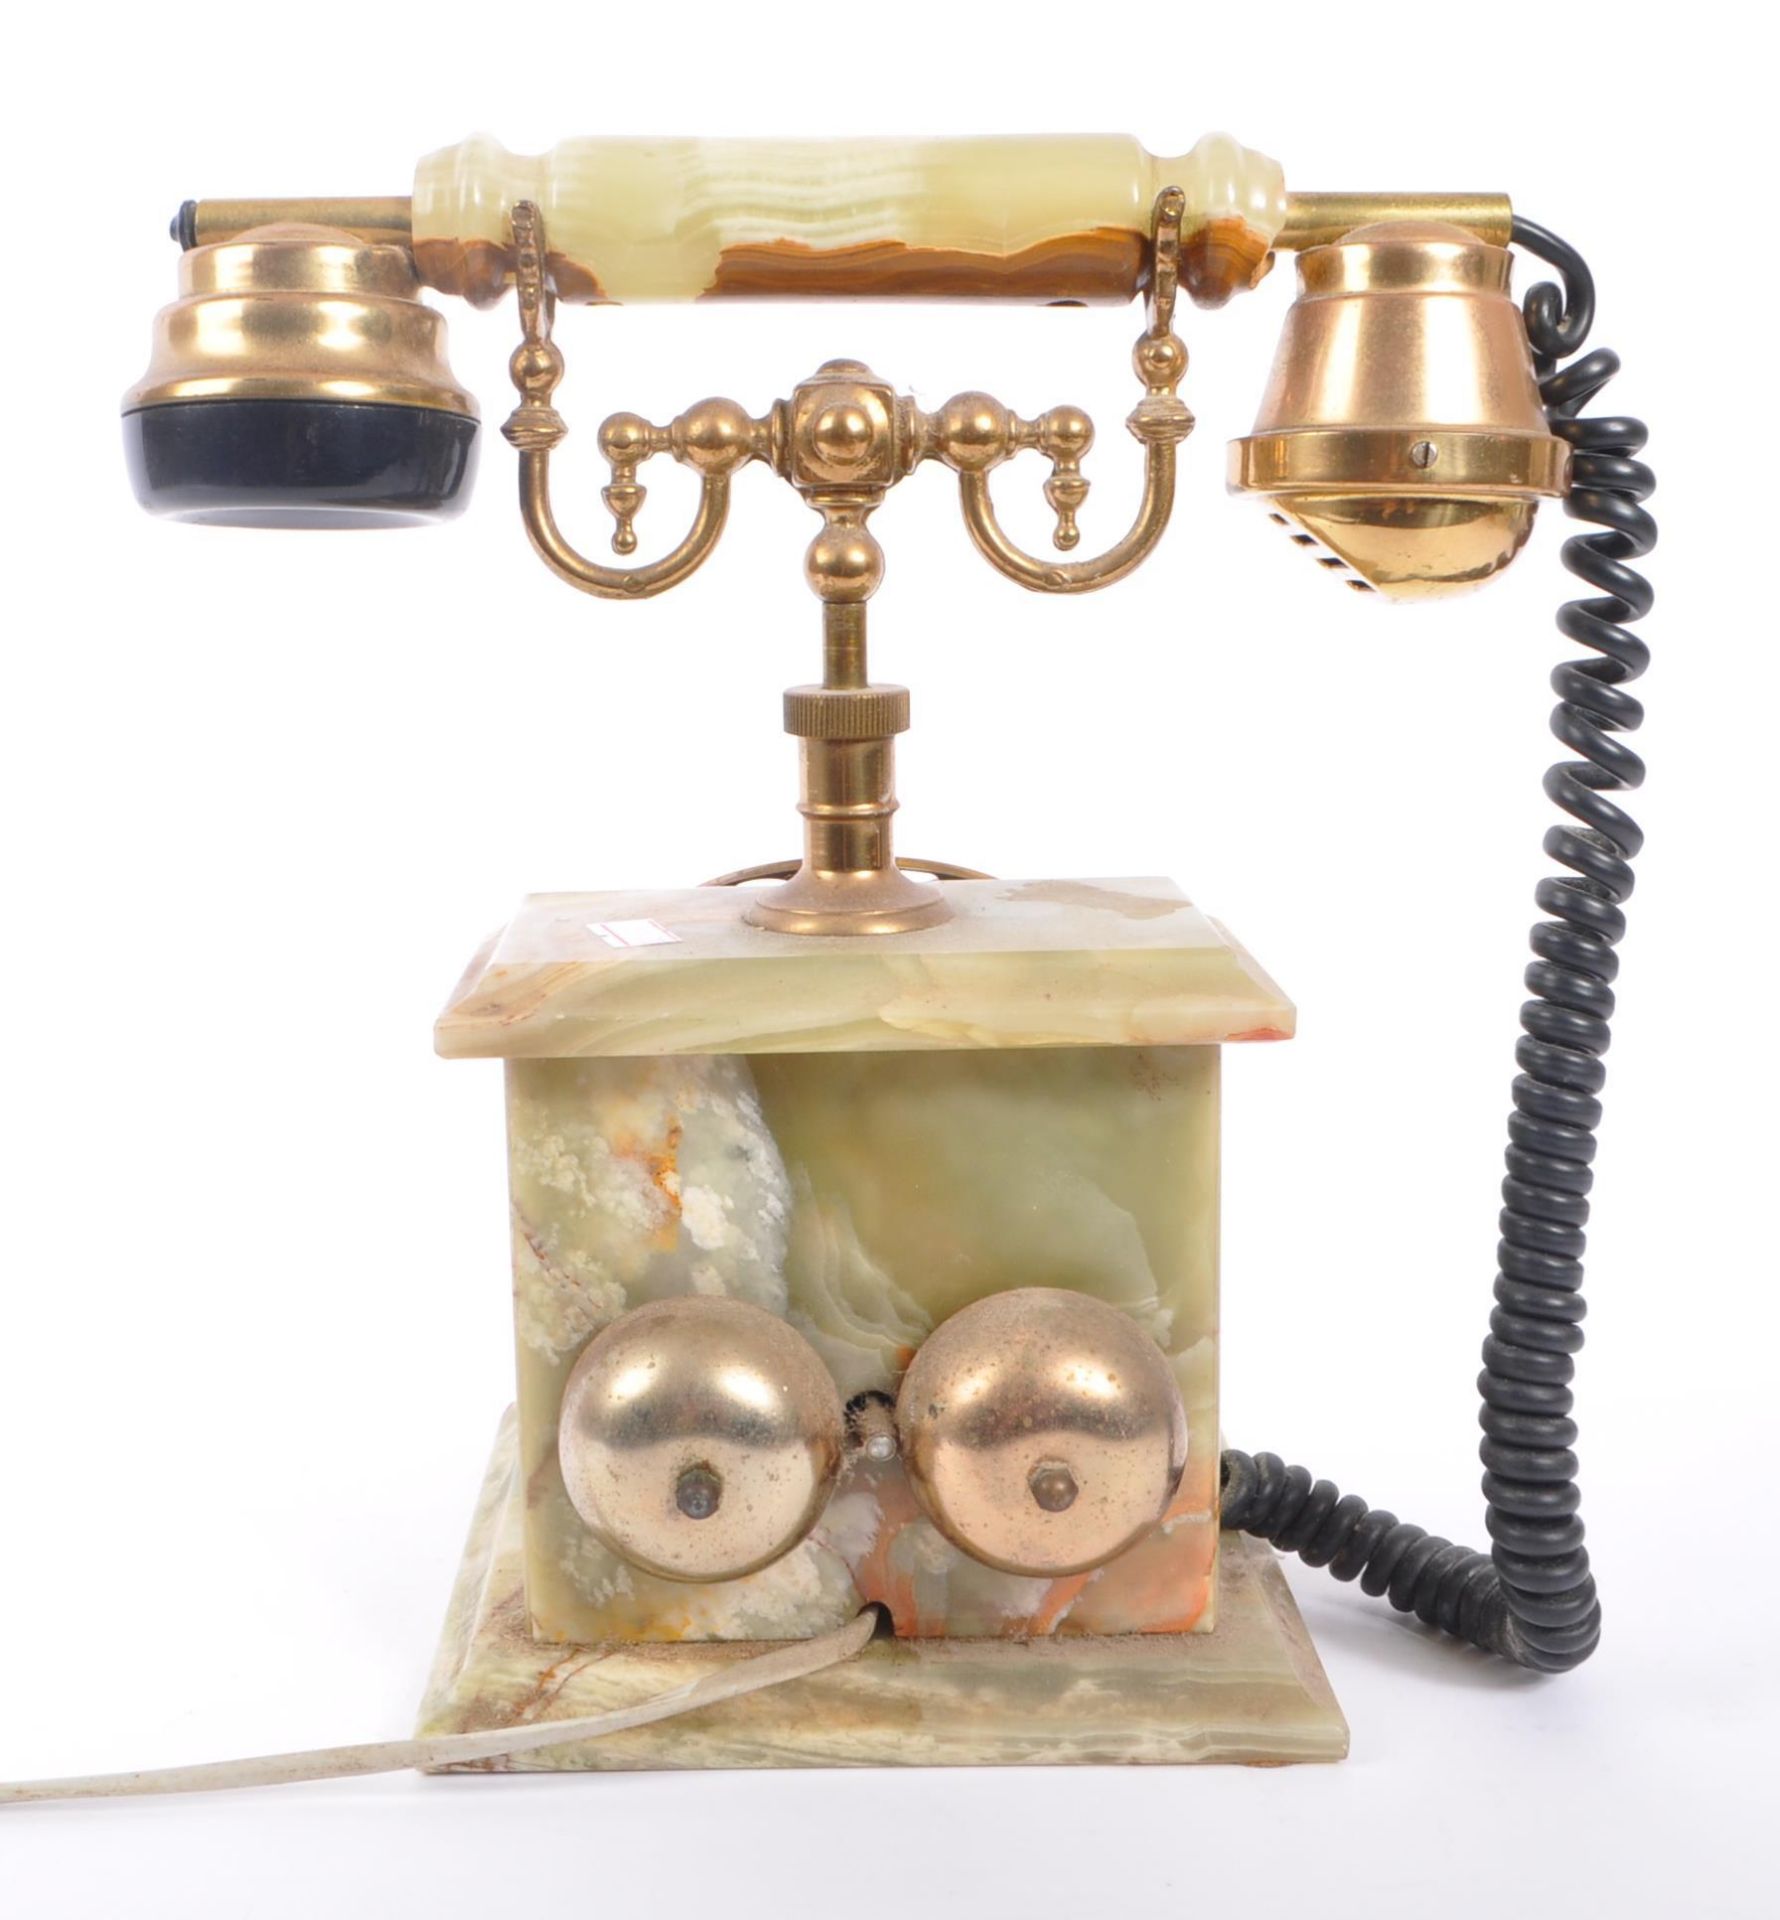 VINTAGE CIRCA. 1930S ONYX AND BRASS ROTARY DIAL TELEPHONE - Image 3 of 6